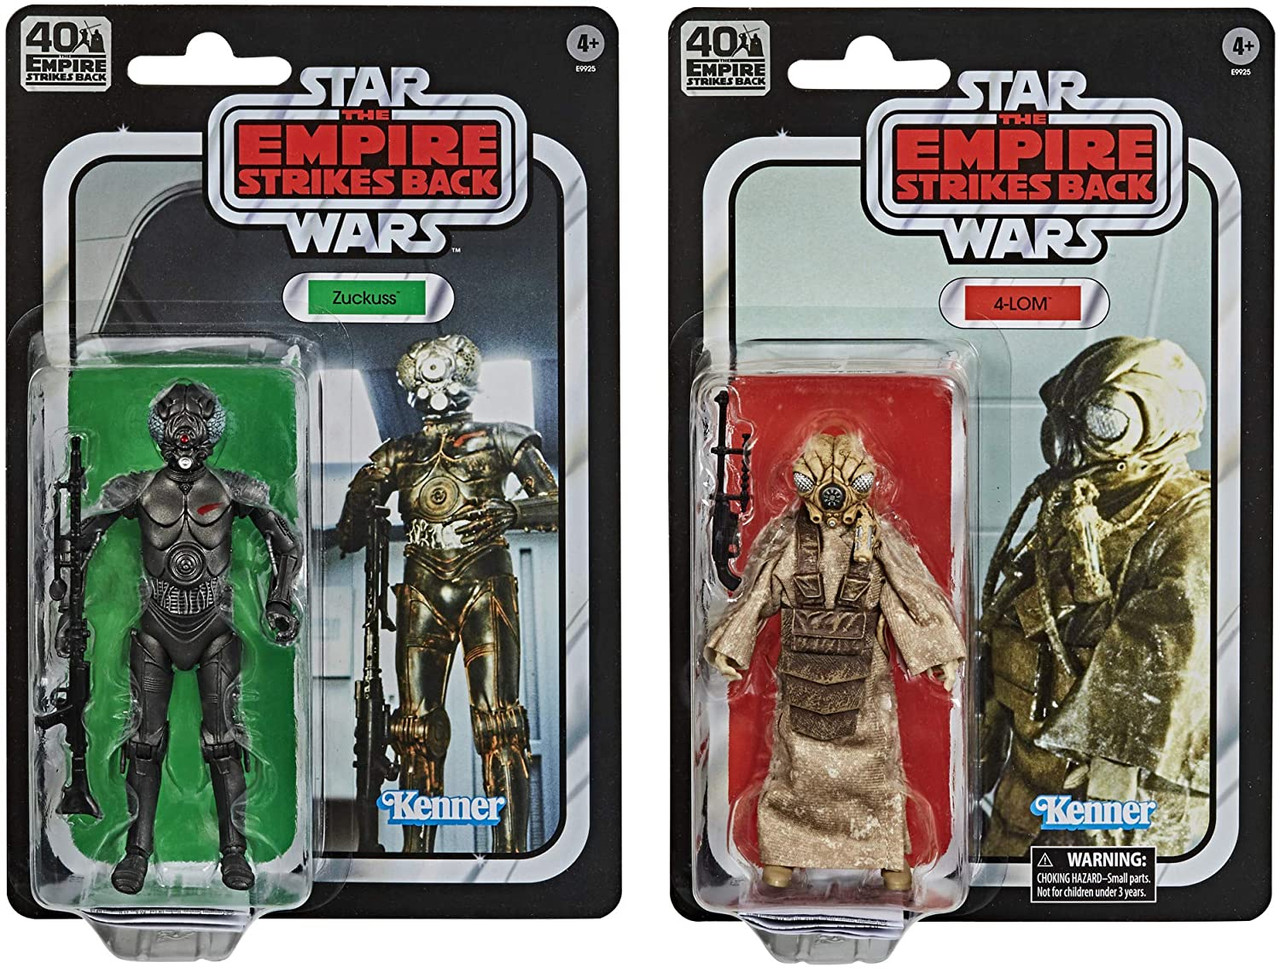 Star Wars 30th Anniversary Collection 4-LOM Action Figure